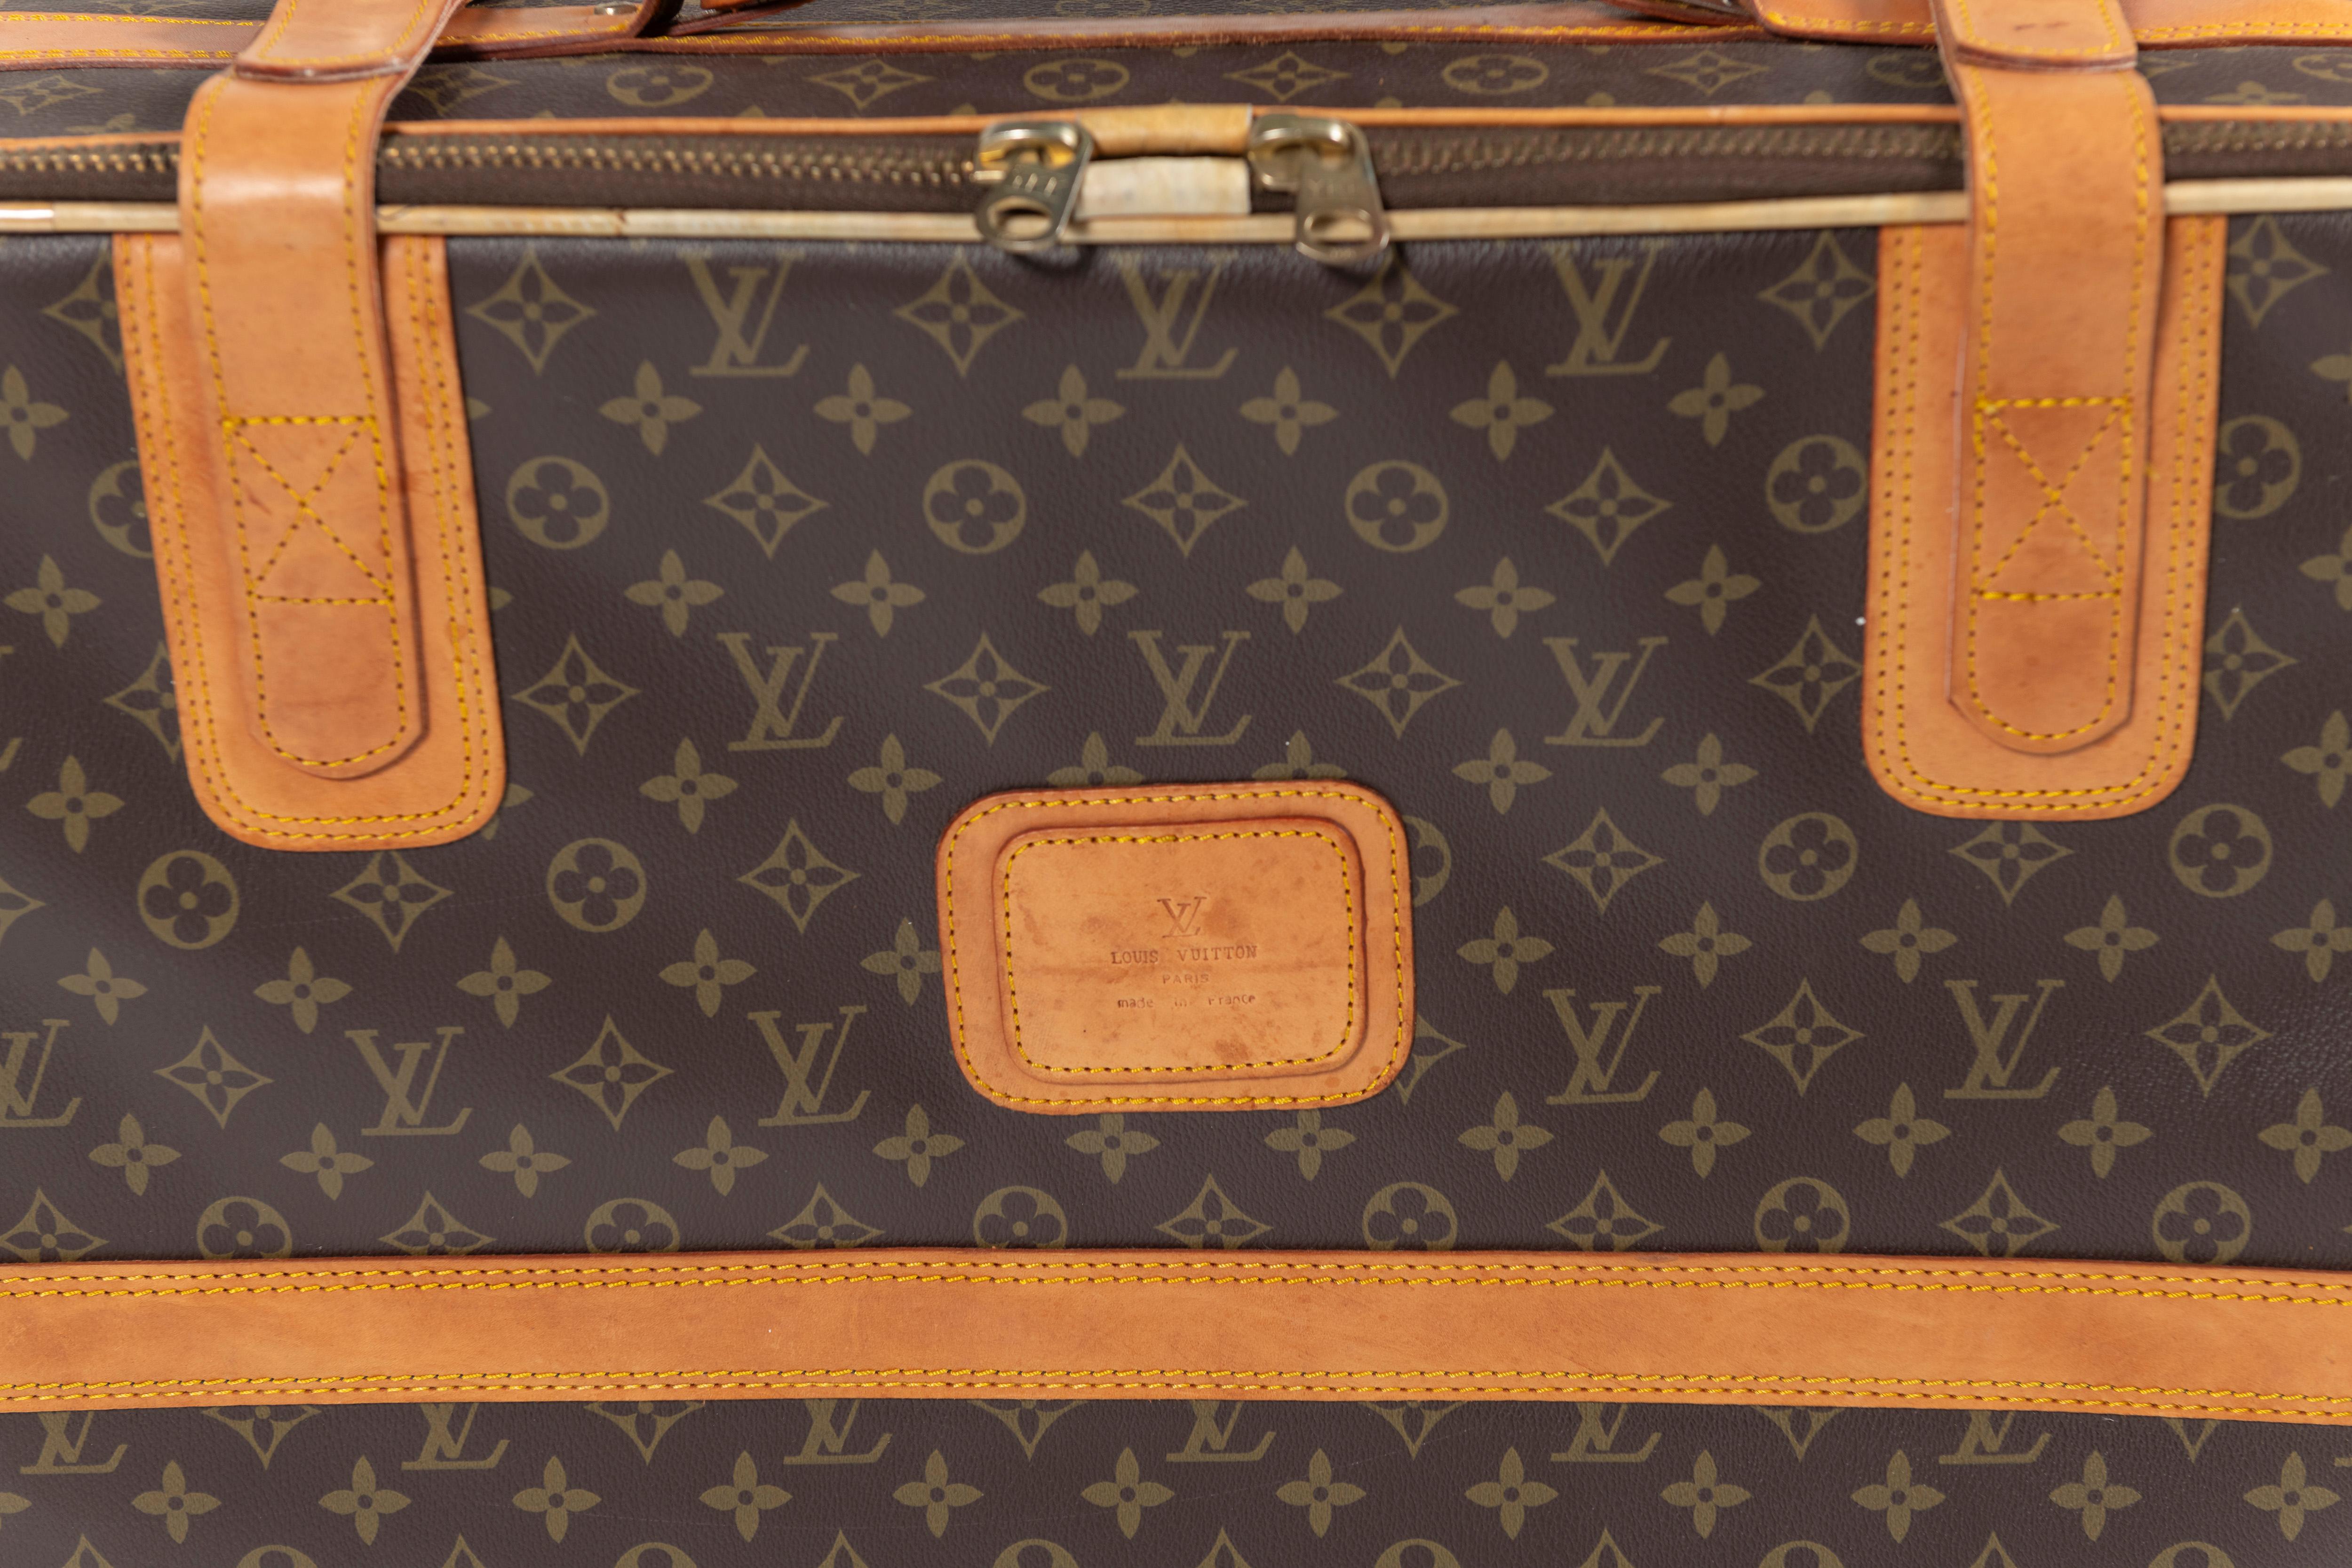 Vintage Louis Vuitton Suitcase, Monogrammed Coated Canvas, Small-Sized For Sale 1